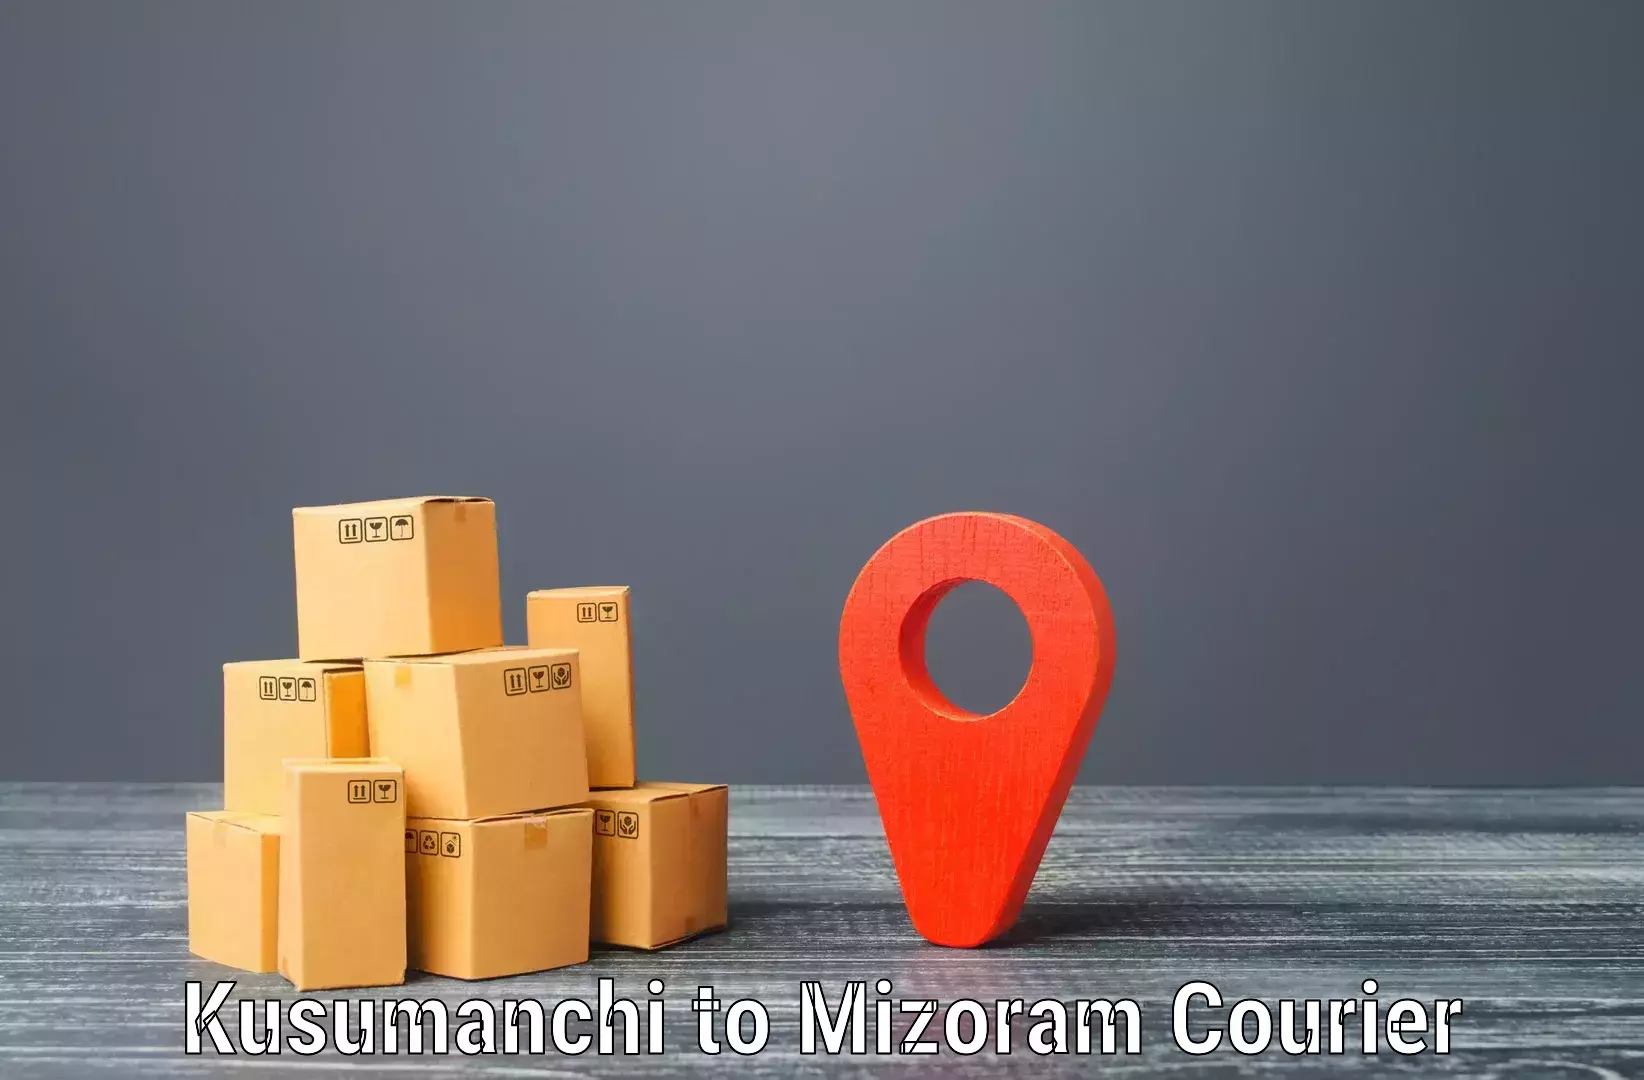 Global parcel delivery in Kusumanchi to Darlawn